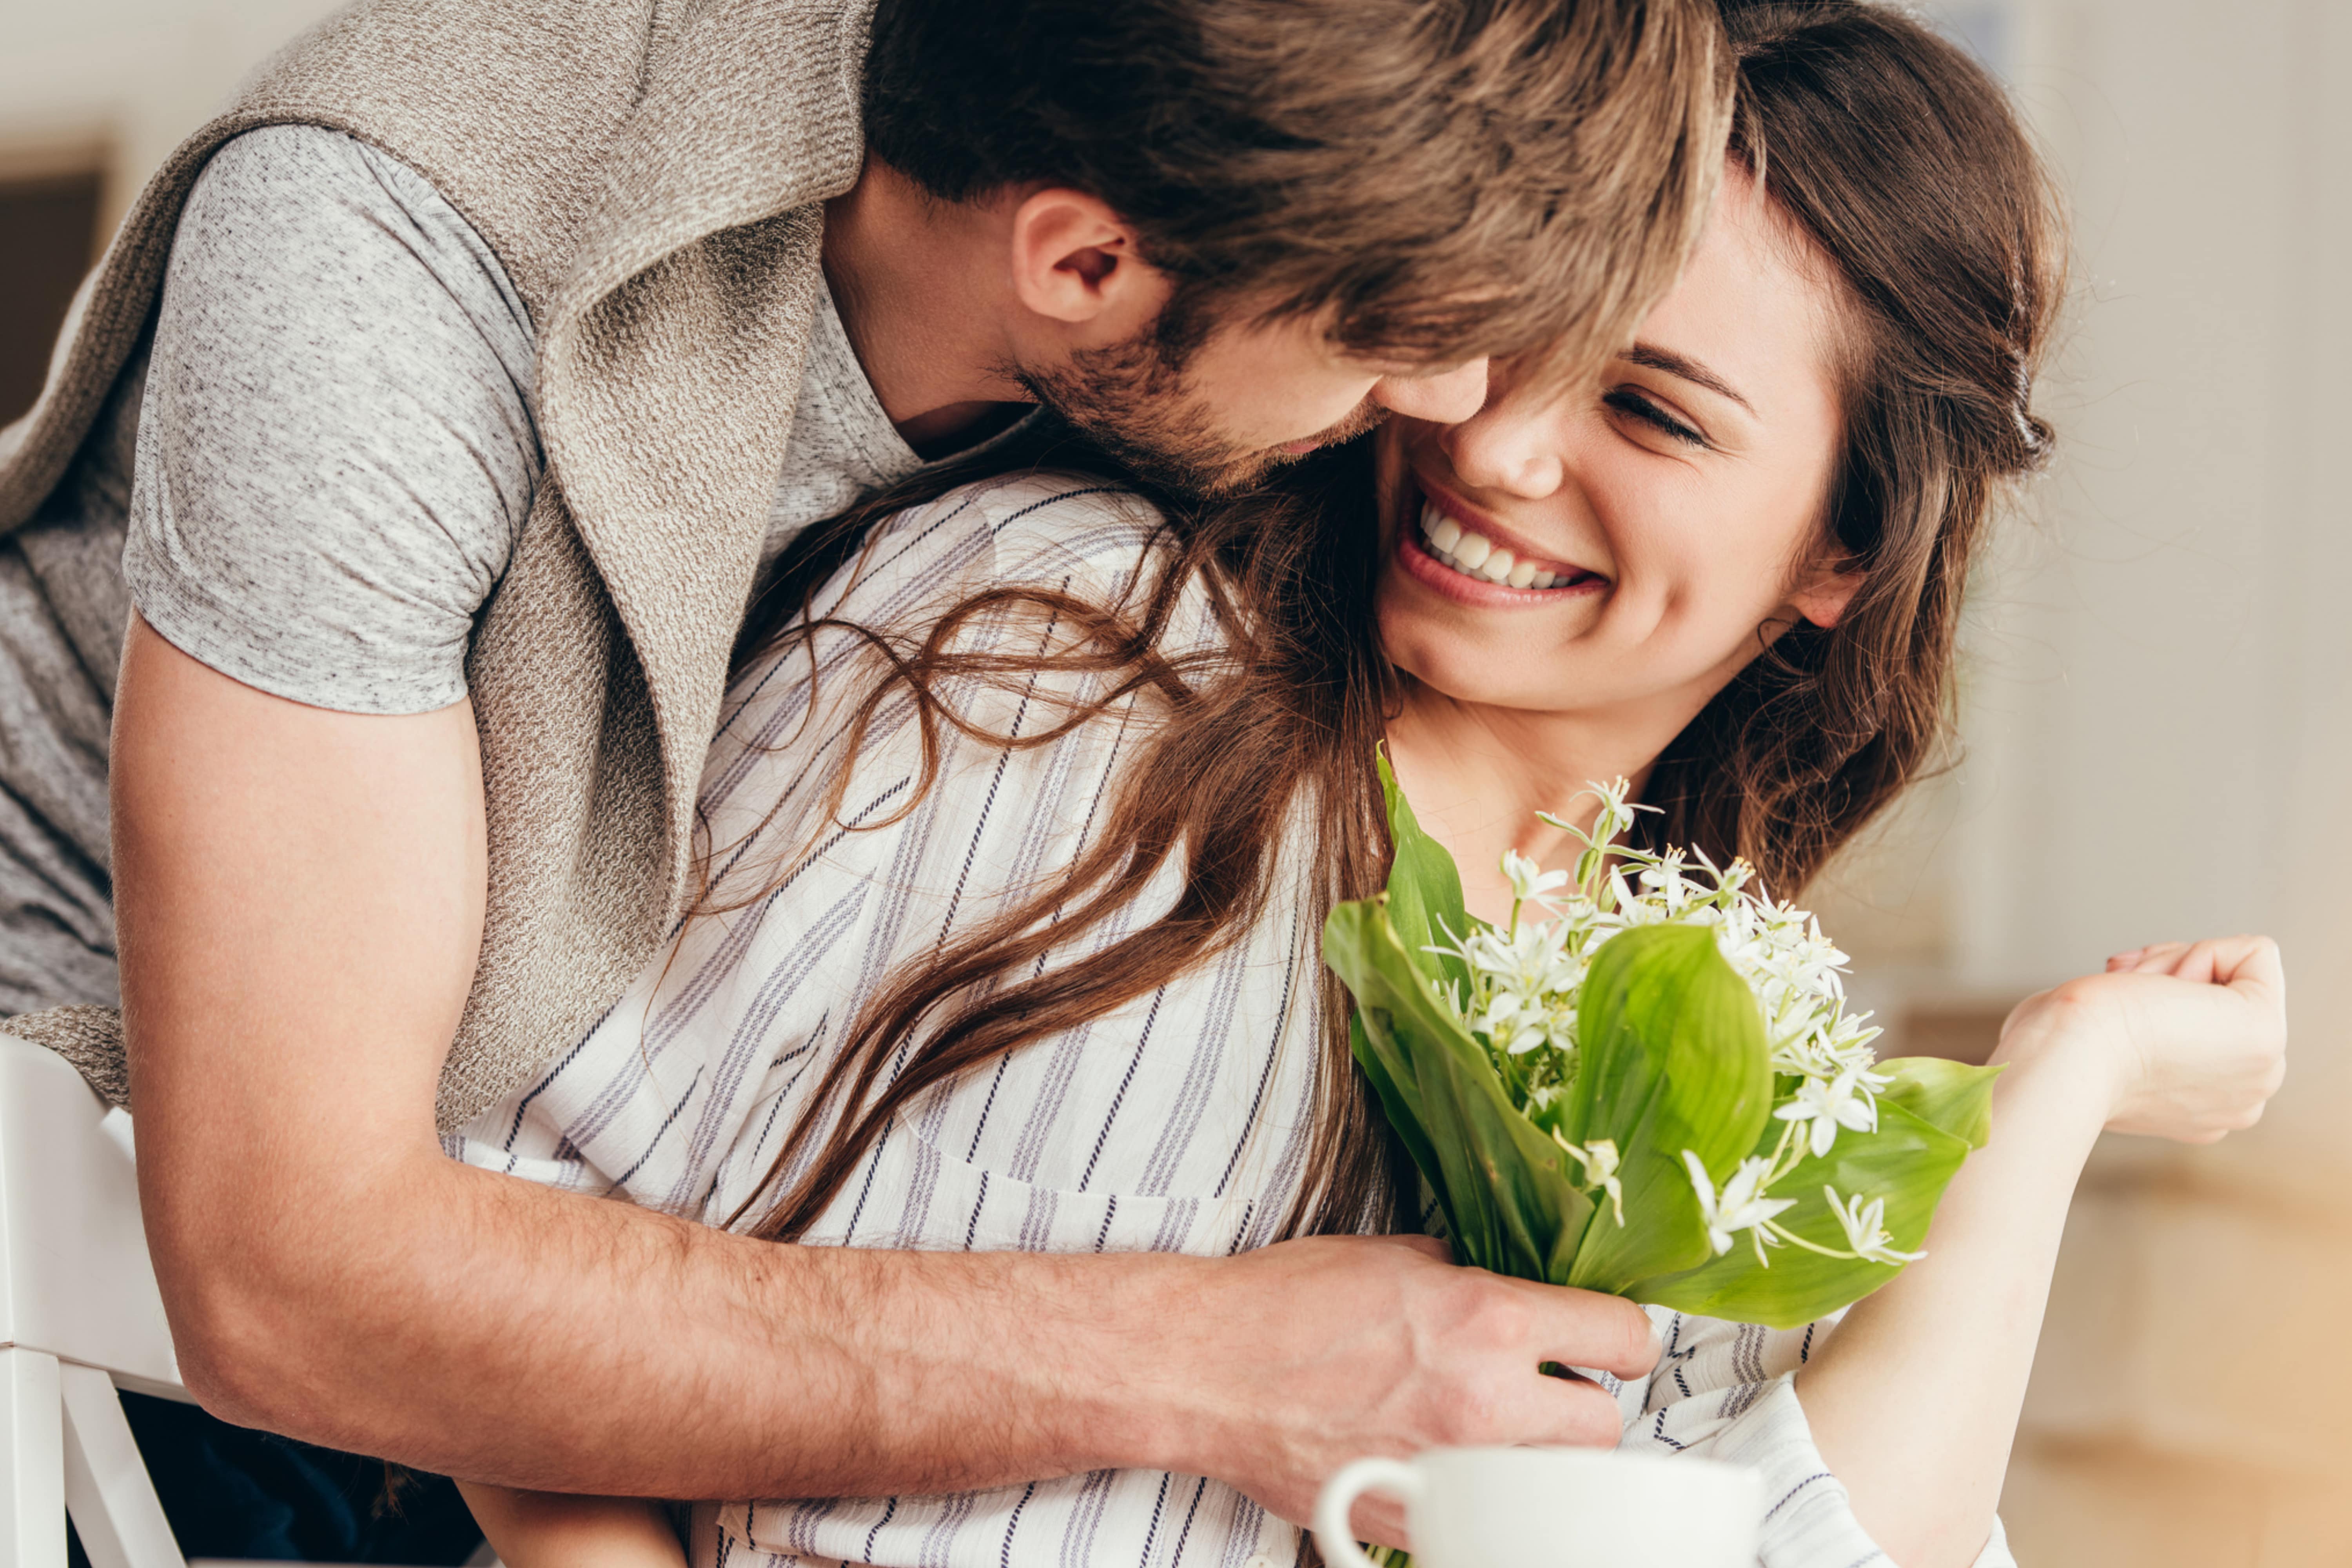 8 Quick Ways to Boost Your Dating Confidence